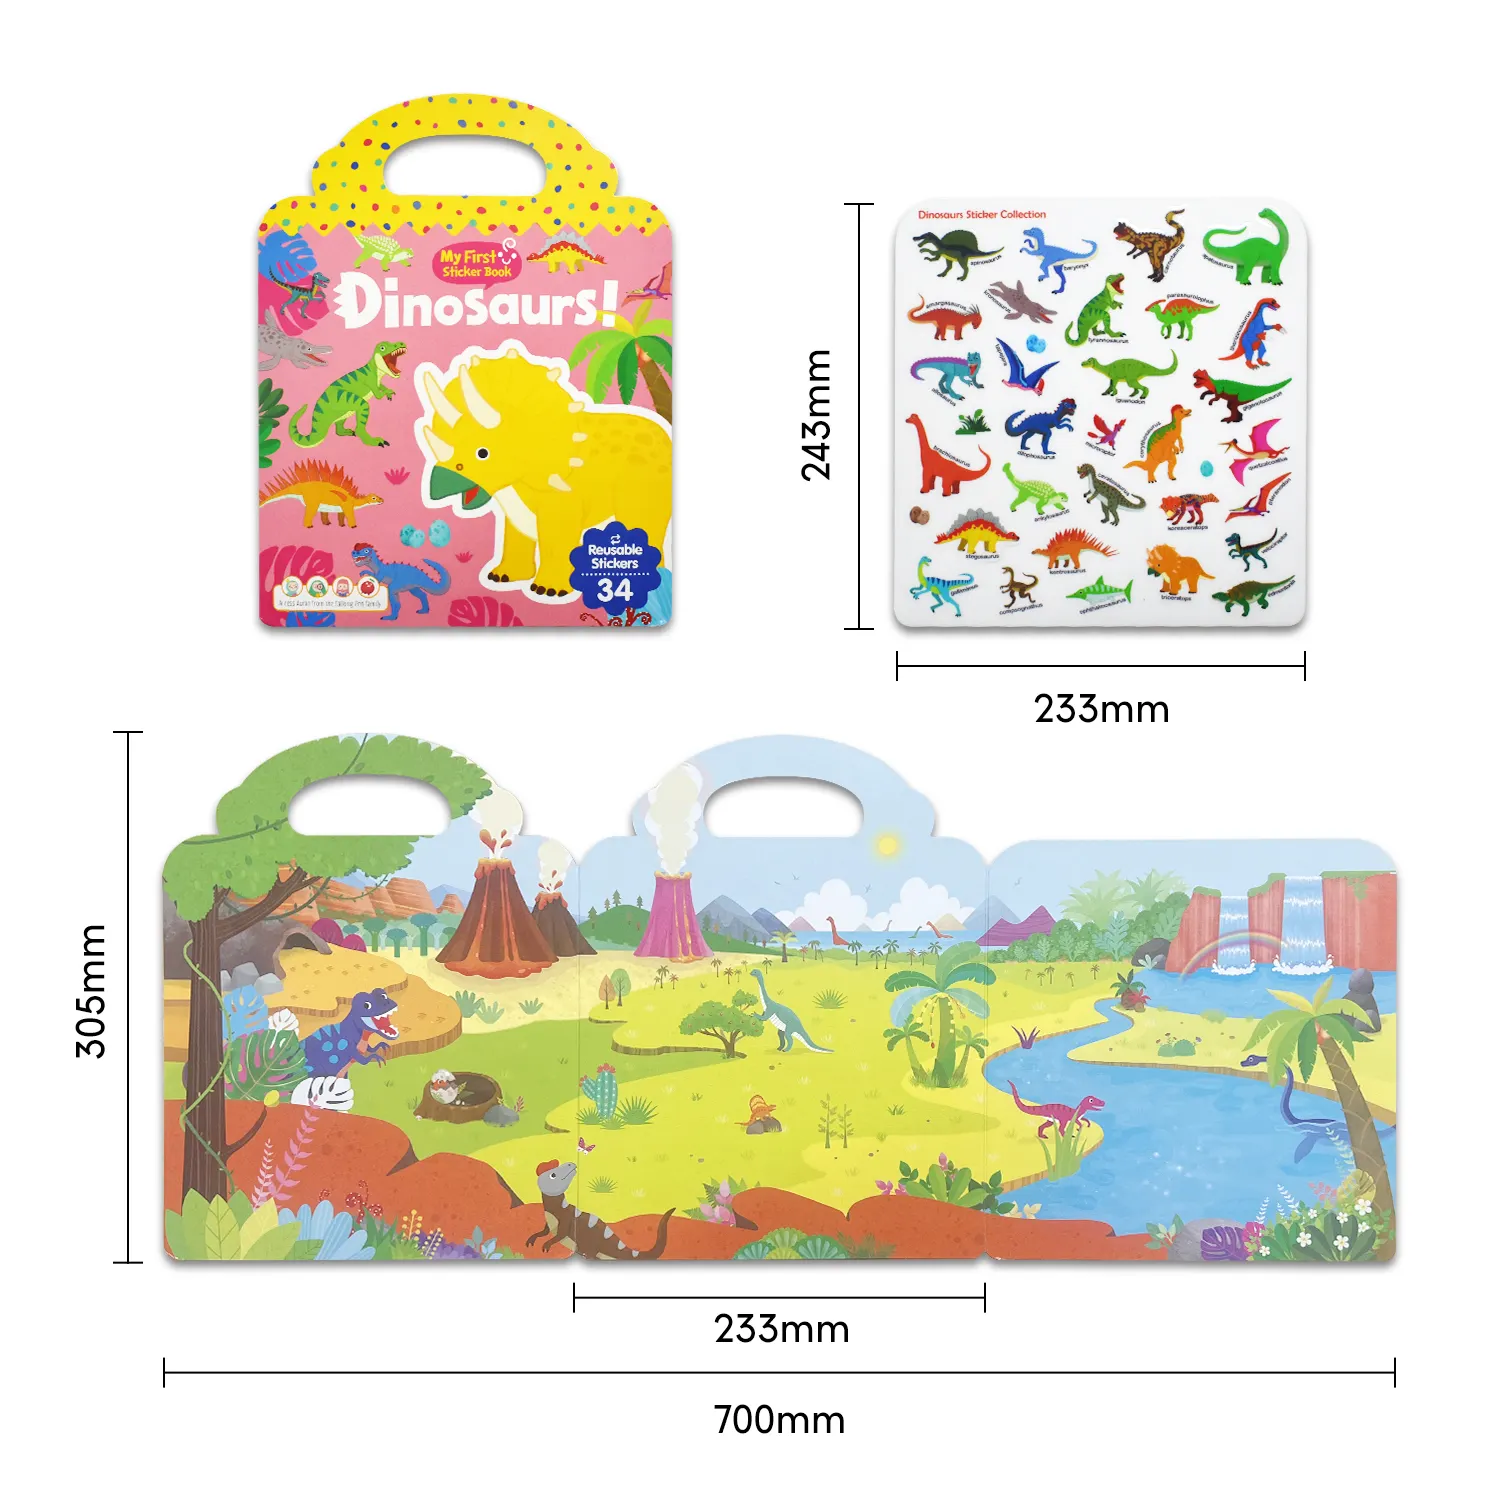 Ocean and Animals Theme Activity Books Stickers for Girls Boys Preschool Education Learning Toys 2 3 4-Year-Old Birthday Gift